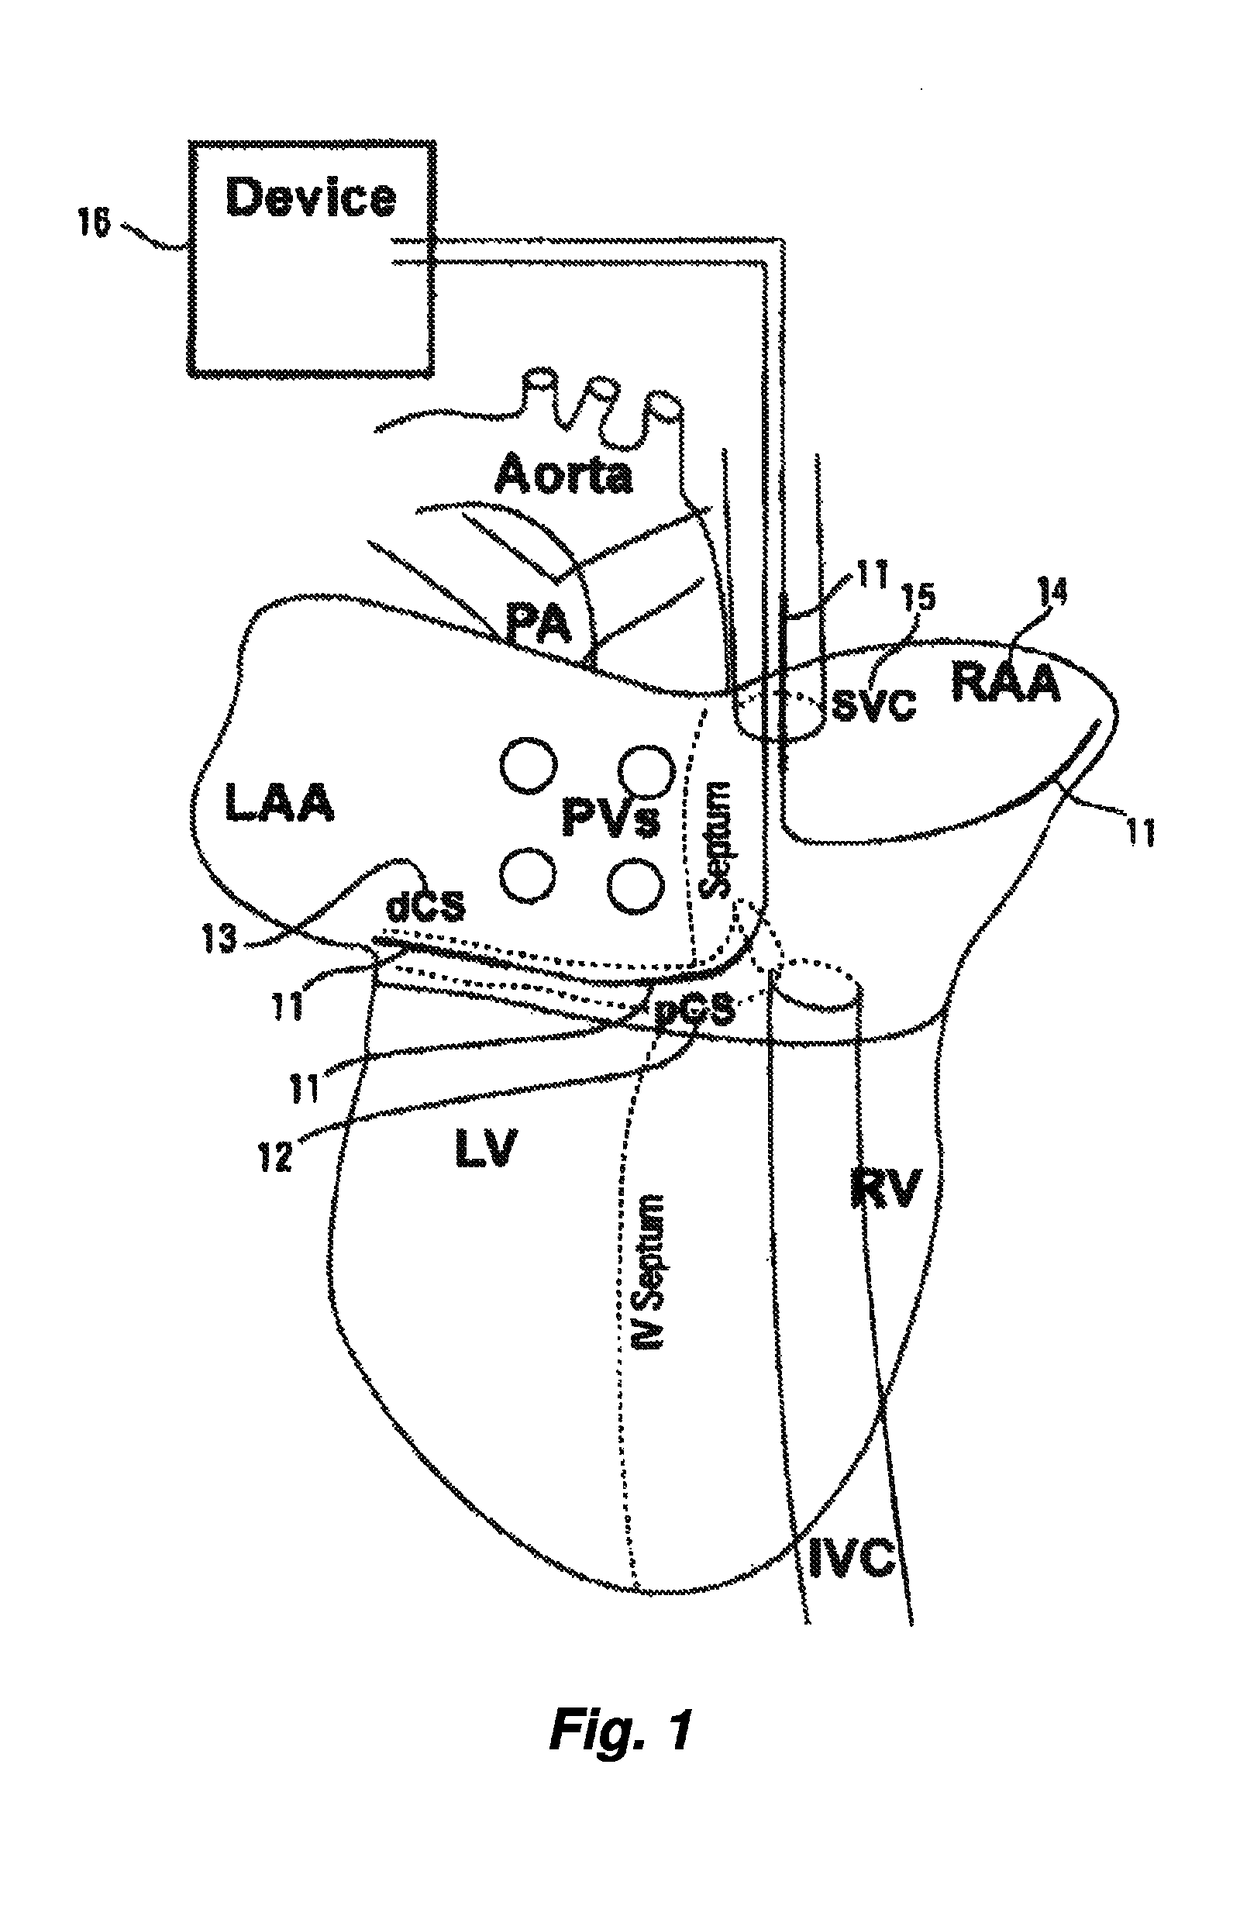 Low-energy atrial cardioversion therapy with controllable pulse-shaped waveforms